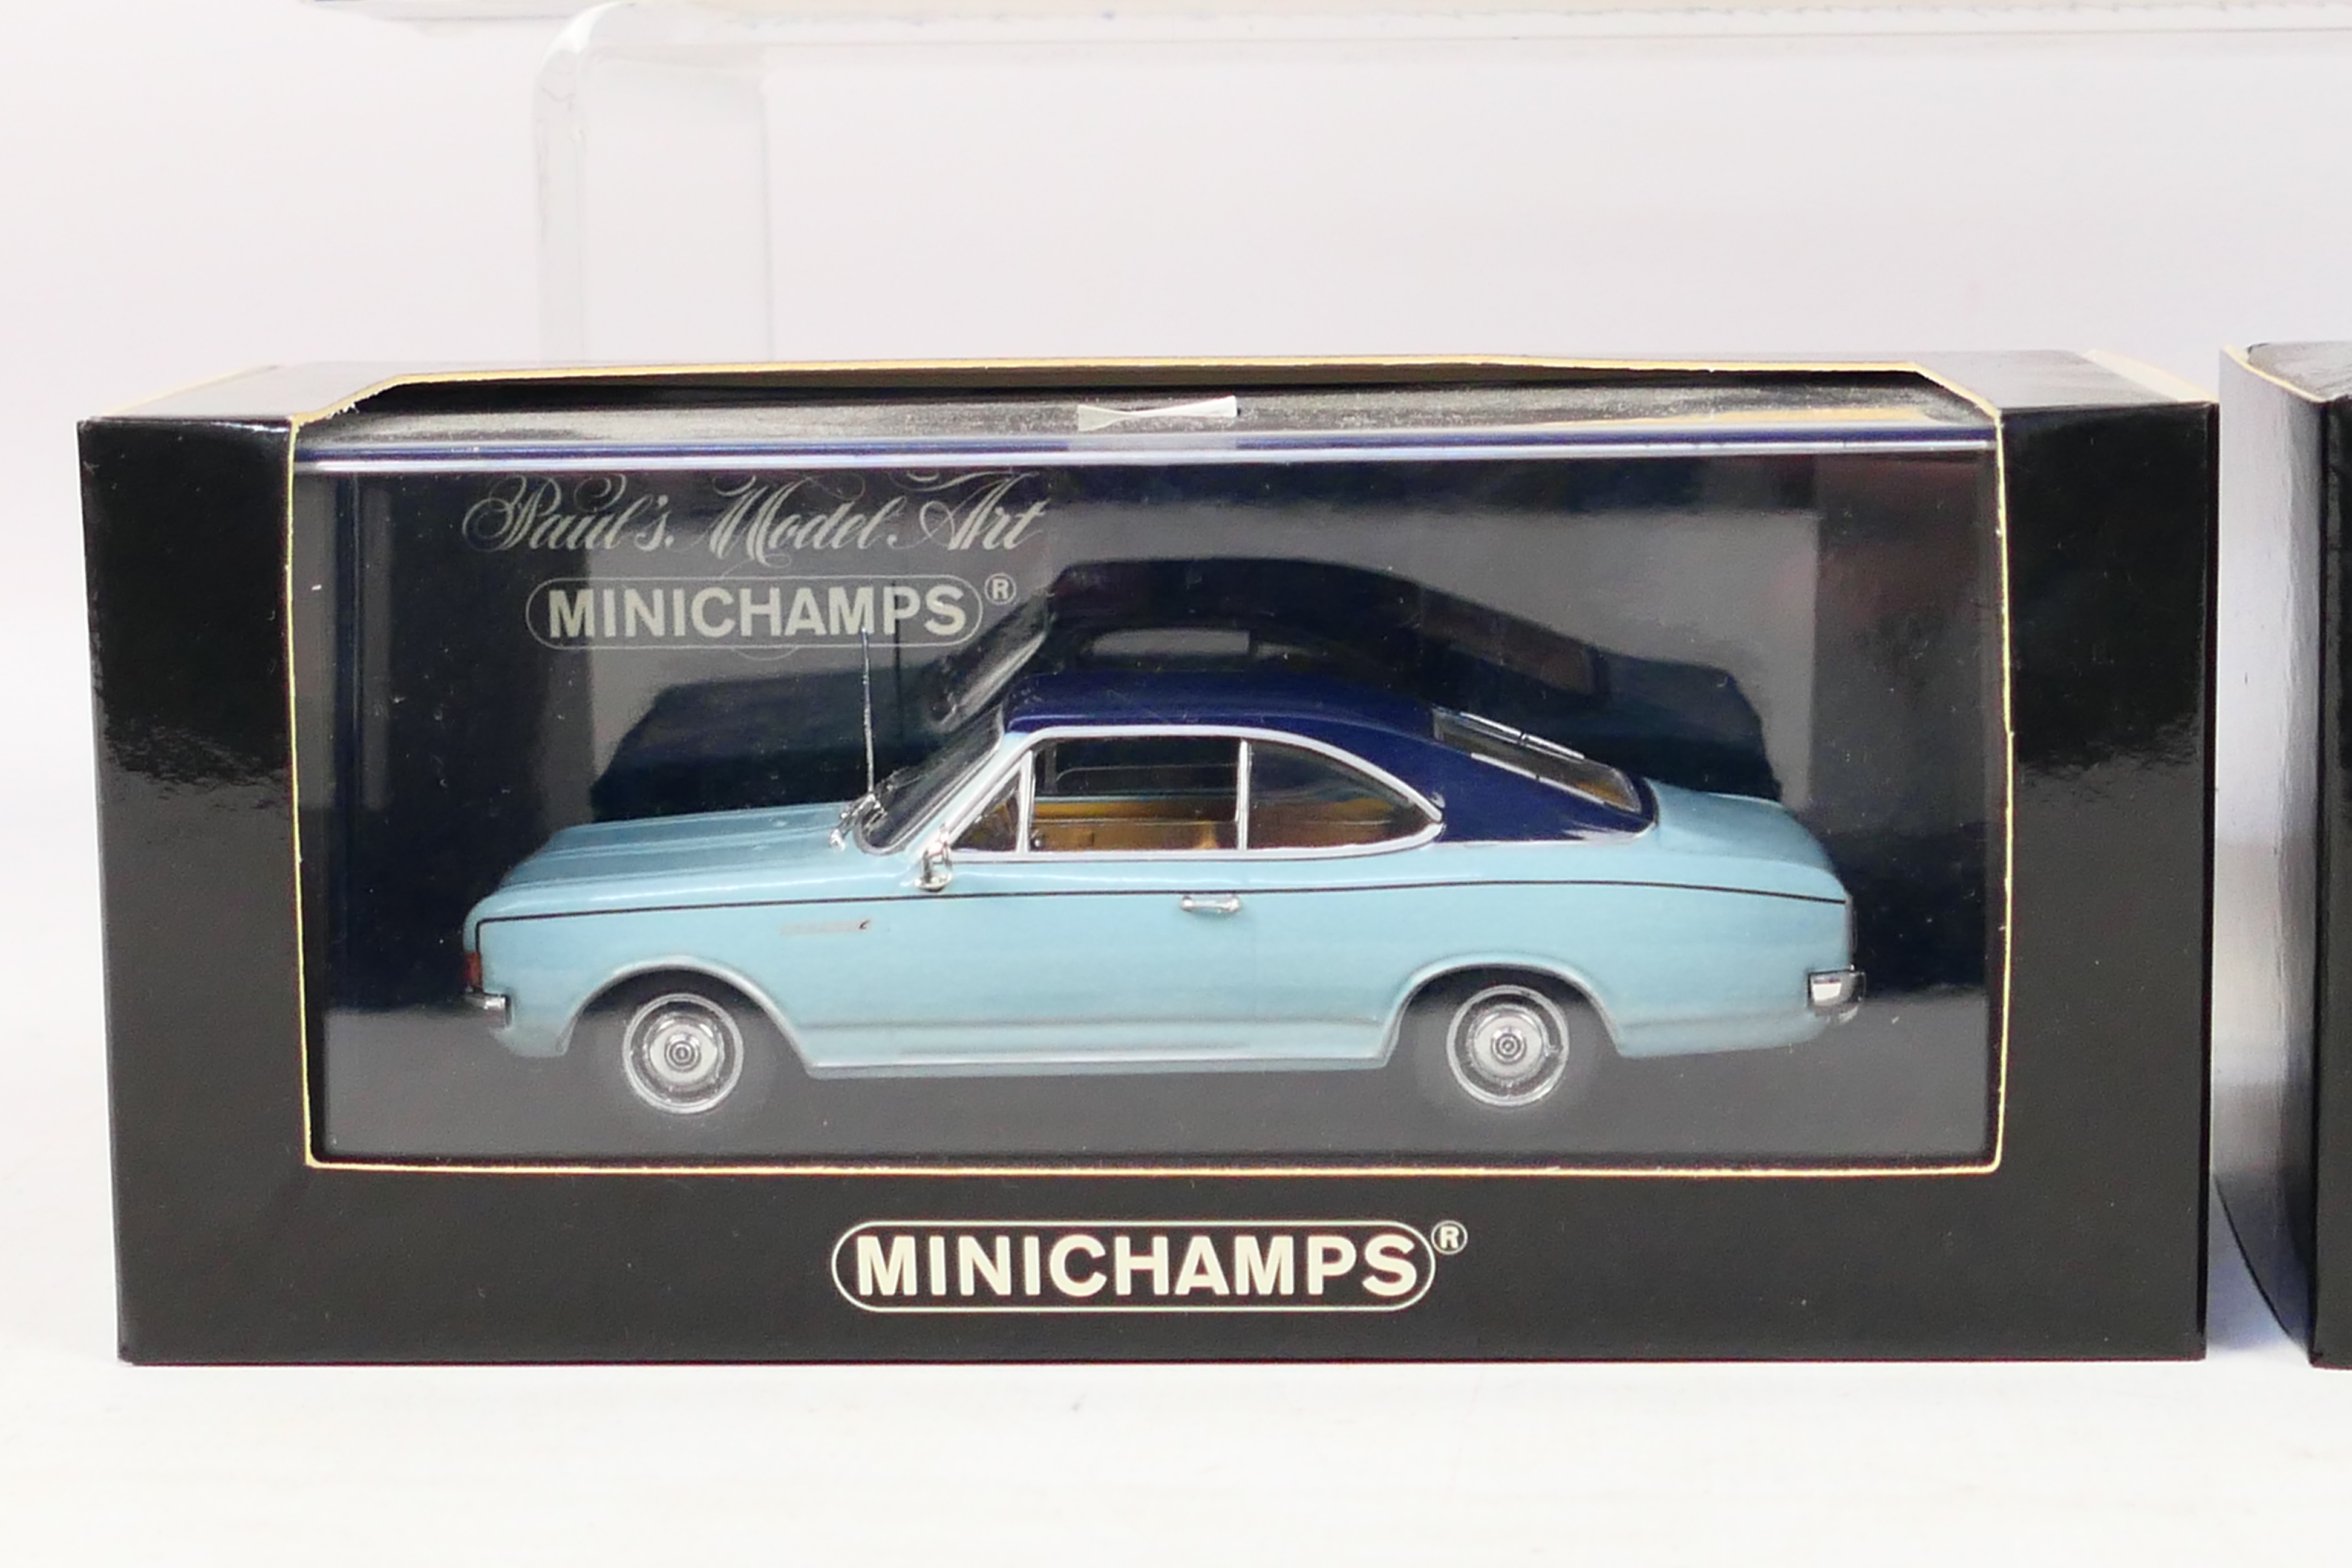 Minichamps - Norev - Four boxed 1:43 scale diecast model cars. - Image 5 of 5